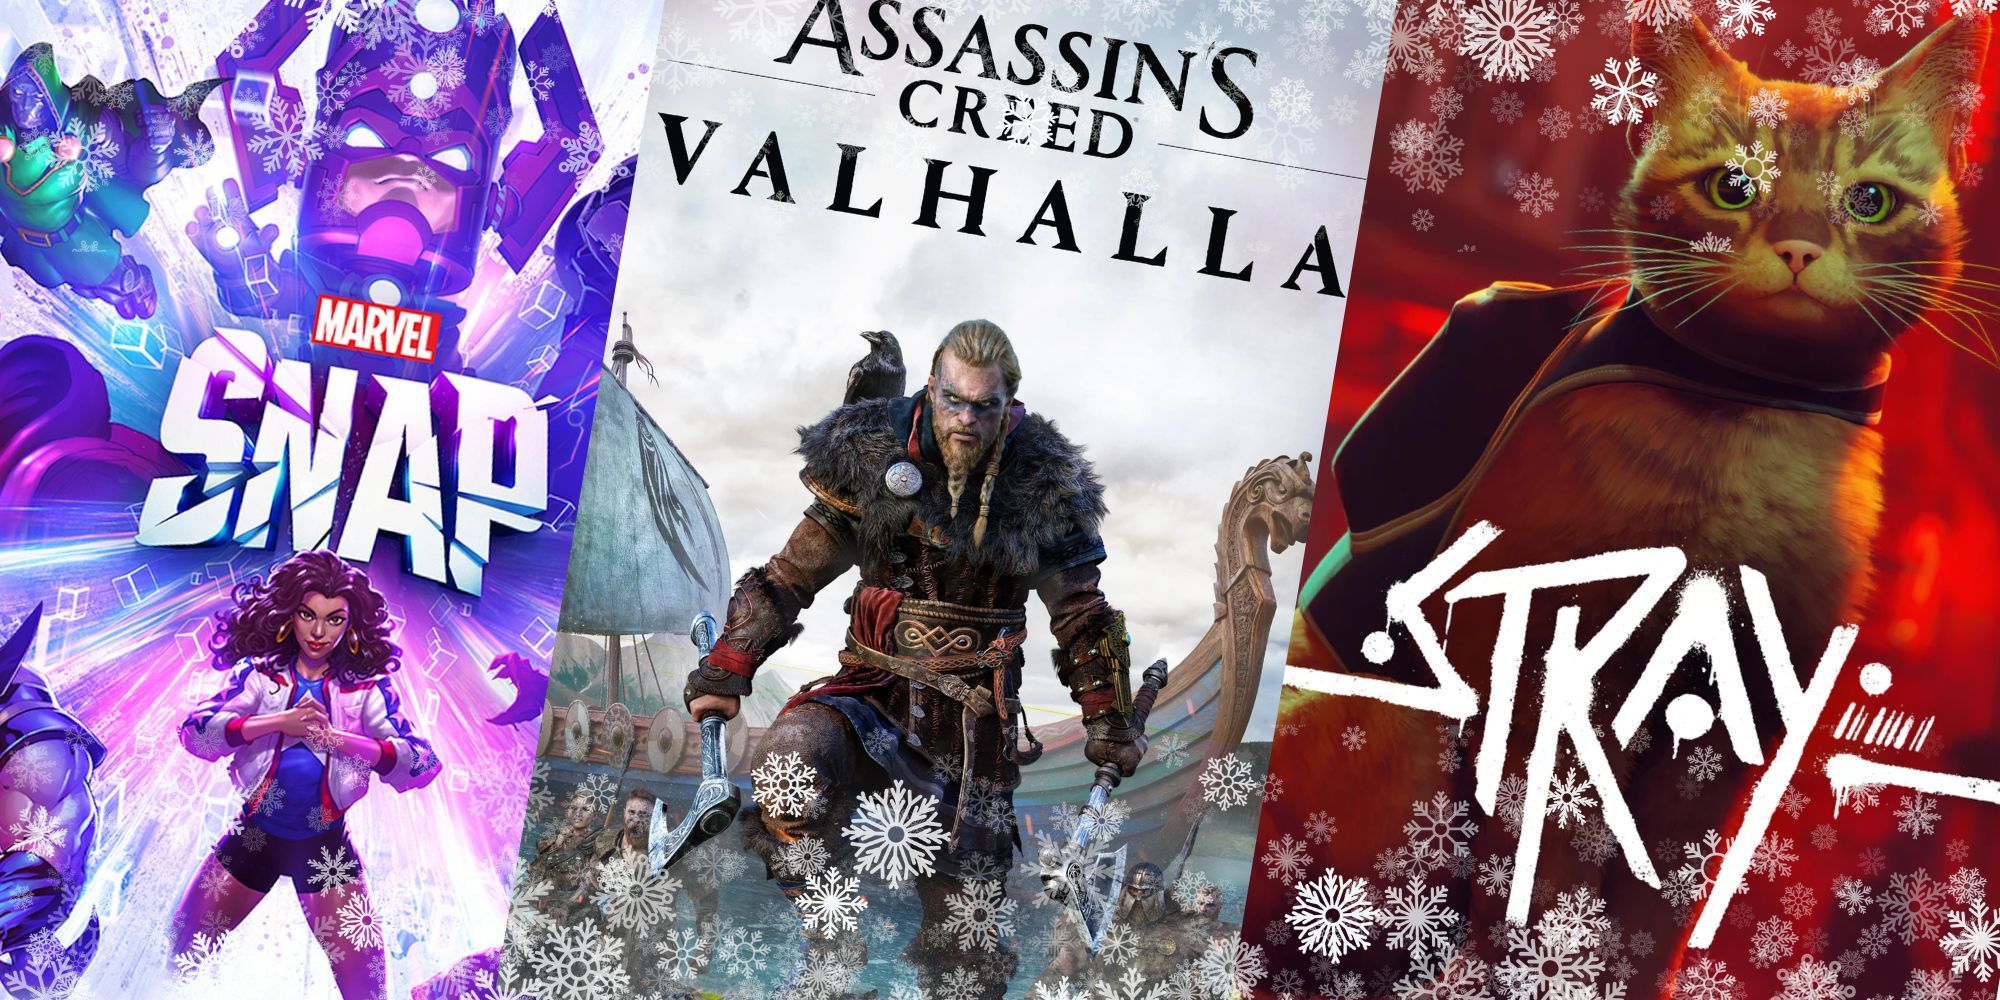 Marvel Snap, Assasin's Creed Valhalla and Stray are some of the Best Video Games To Play At Christmas